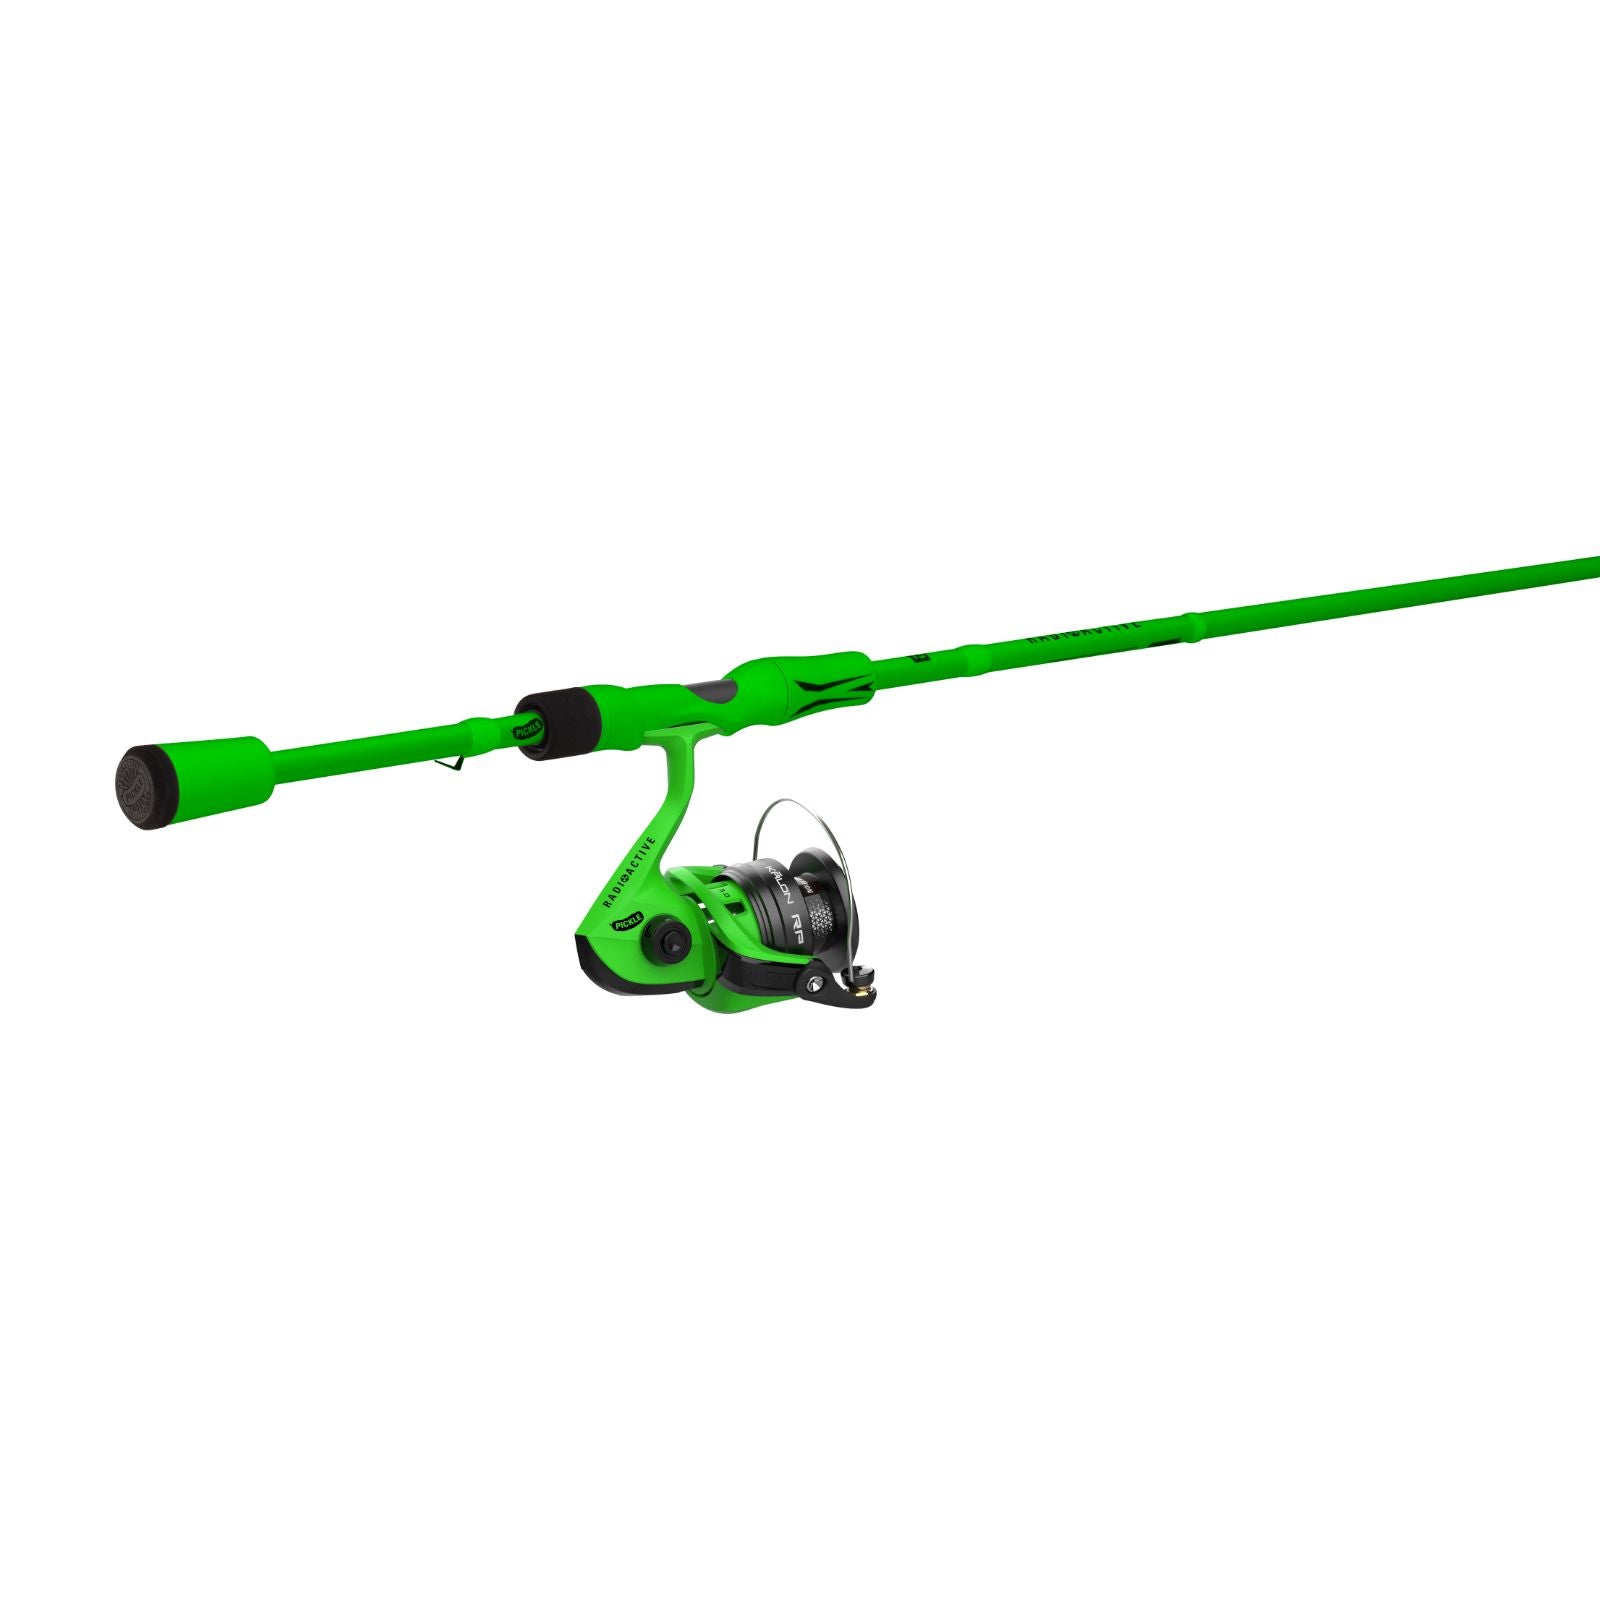 13 Fishing Kalon Radioactive Pickle M Combo - 7ft 1in